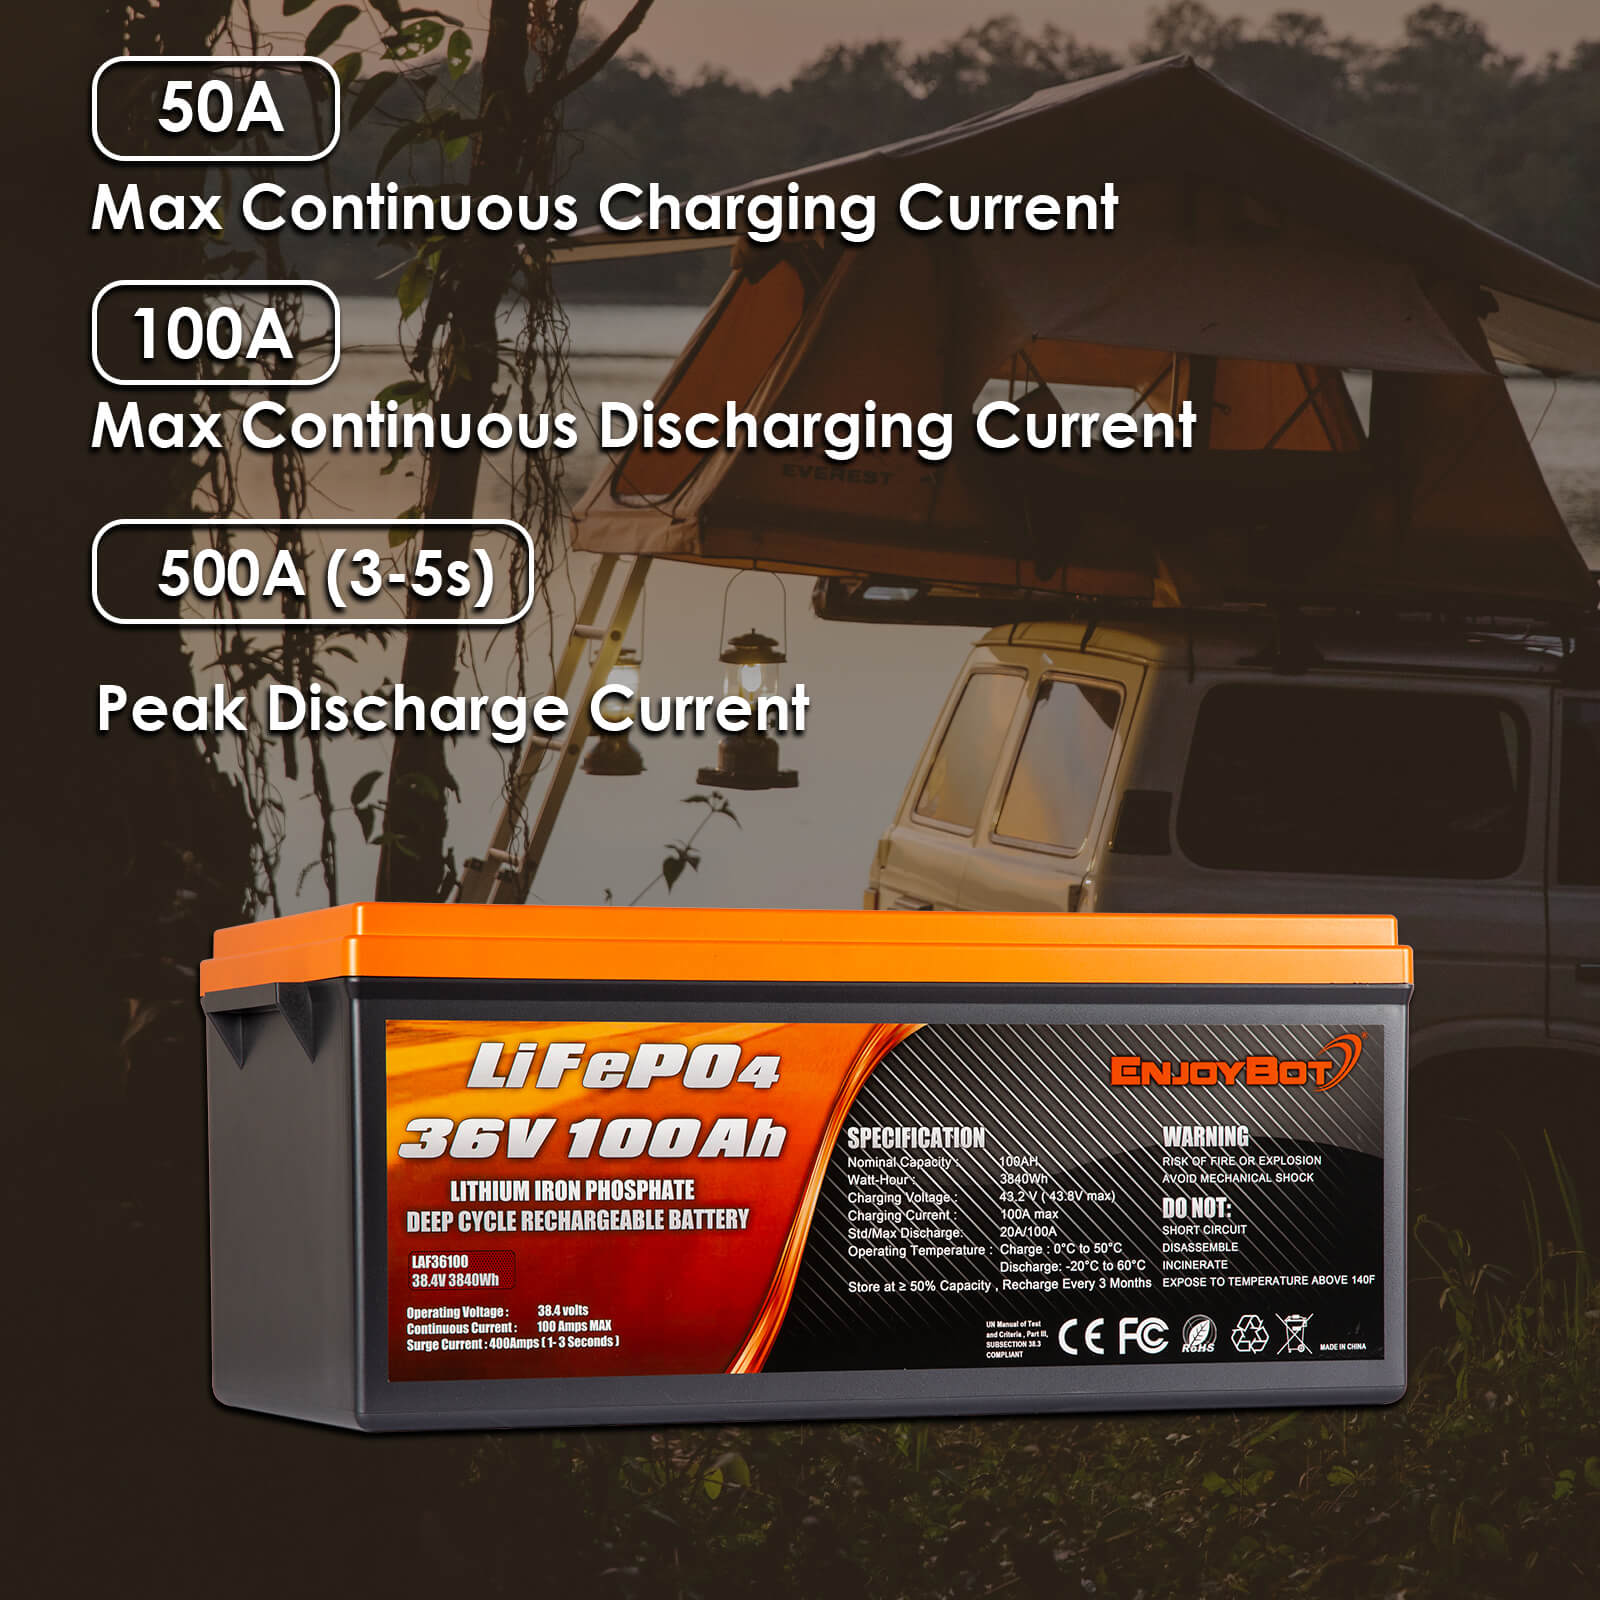 ENJOYBOT Bluetooth 36V 100AH 3840Wh Smart Lithium Battery + Dedicated 20A battery charger